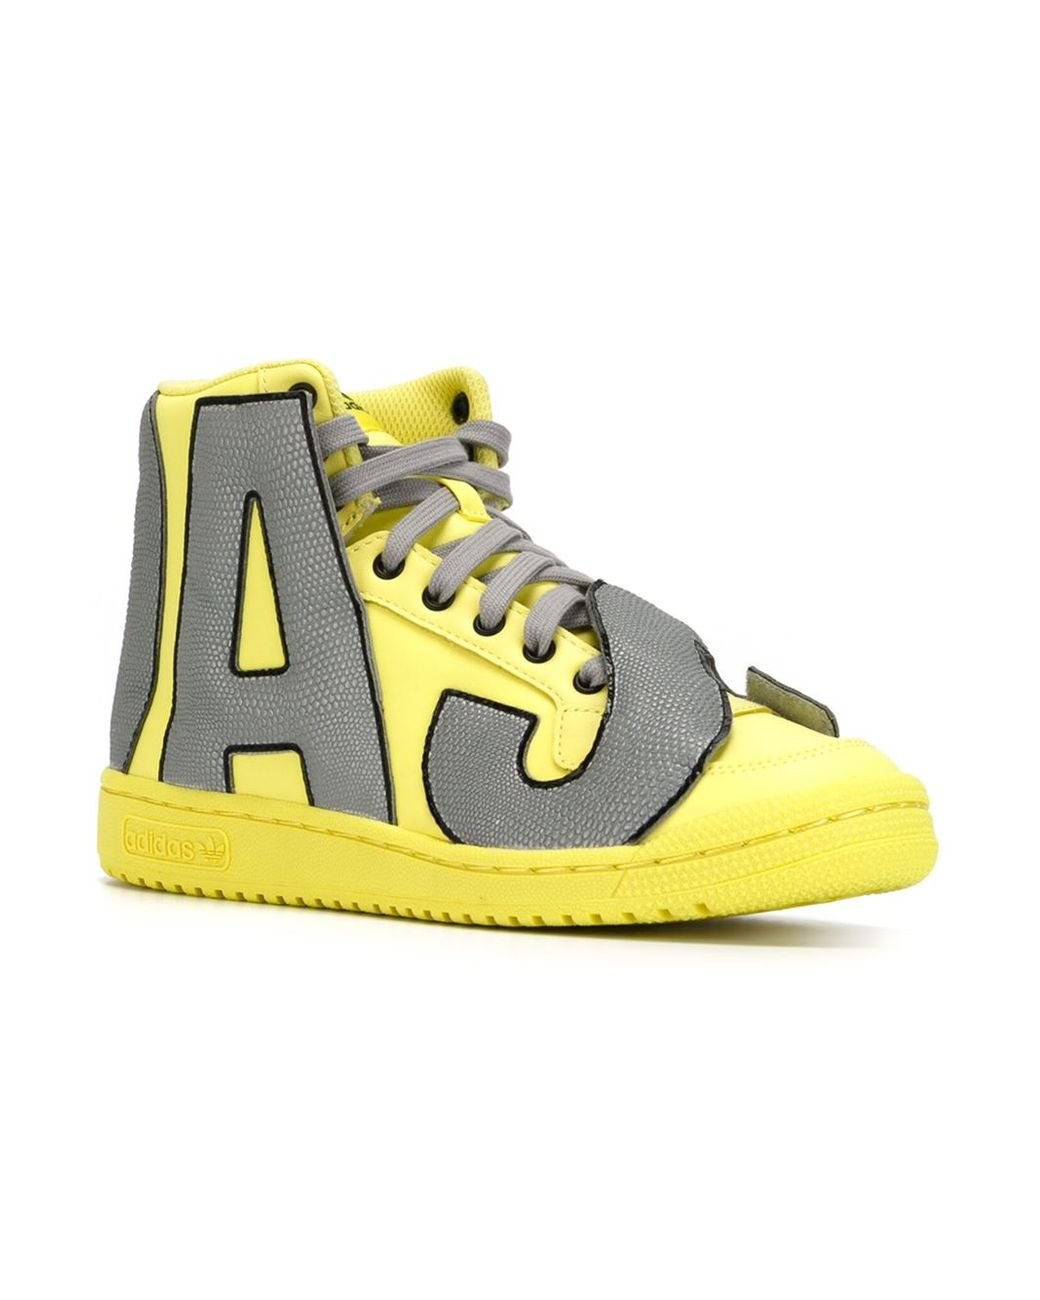 adidas Originals Leather Jeremy Scott X 'letters Reflective' Hi-top  Sneakers in Yellow & Orange (Yellow) | Lyst